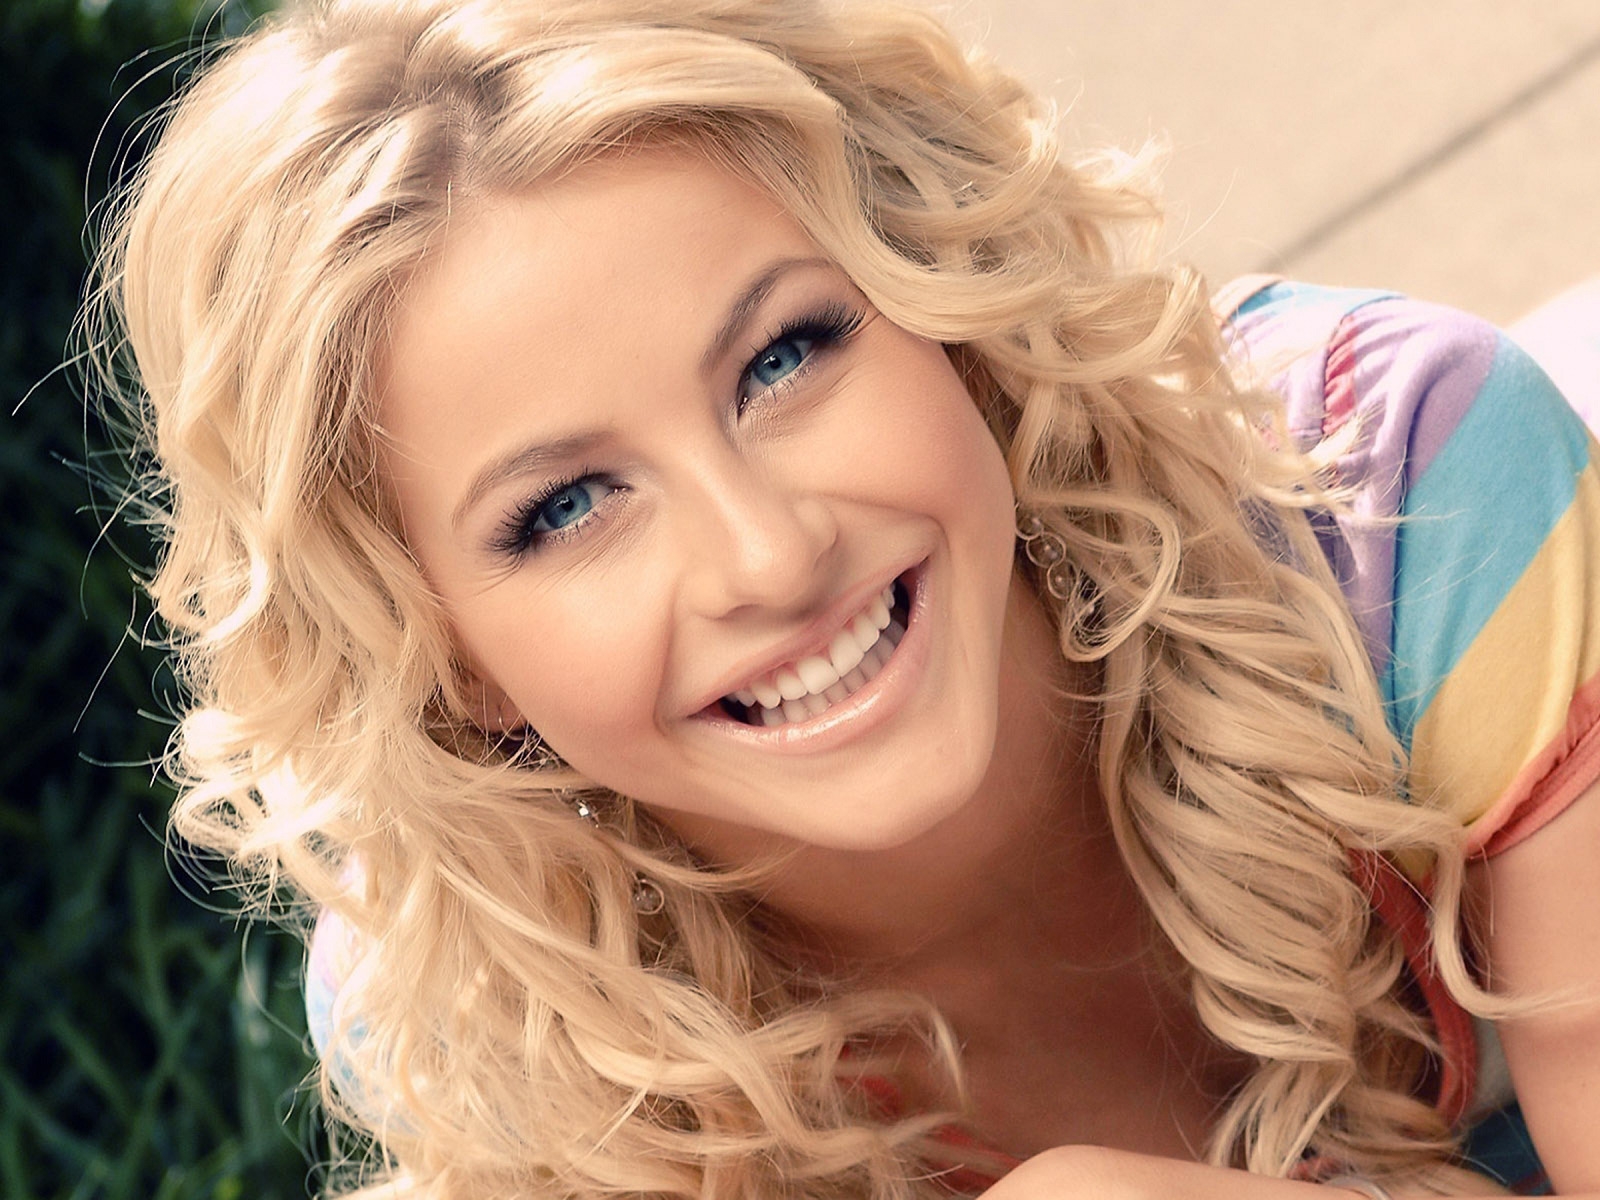 Julianne Hough Smile for 1600 x 1200 resolution